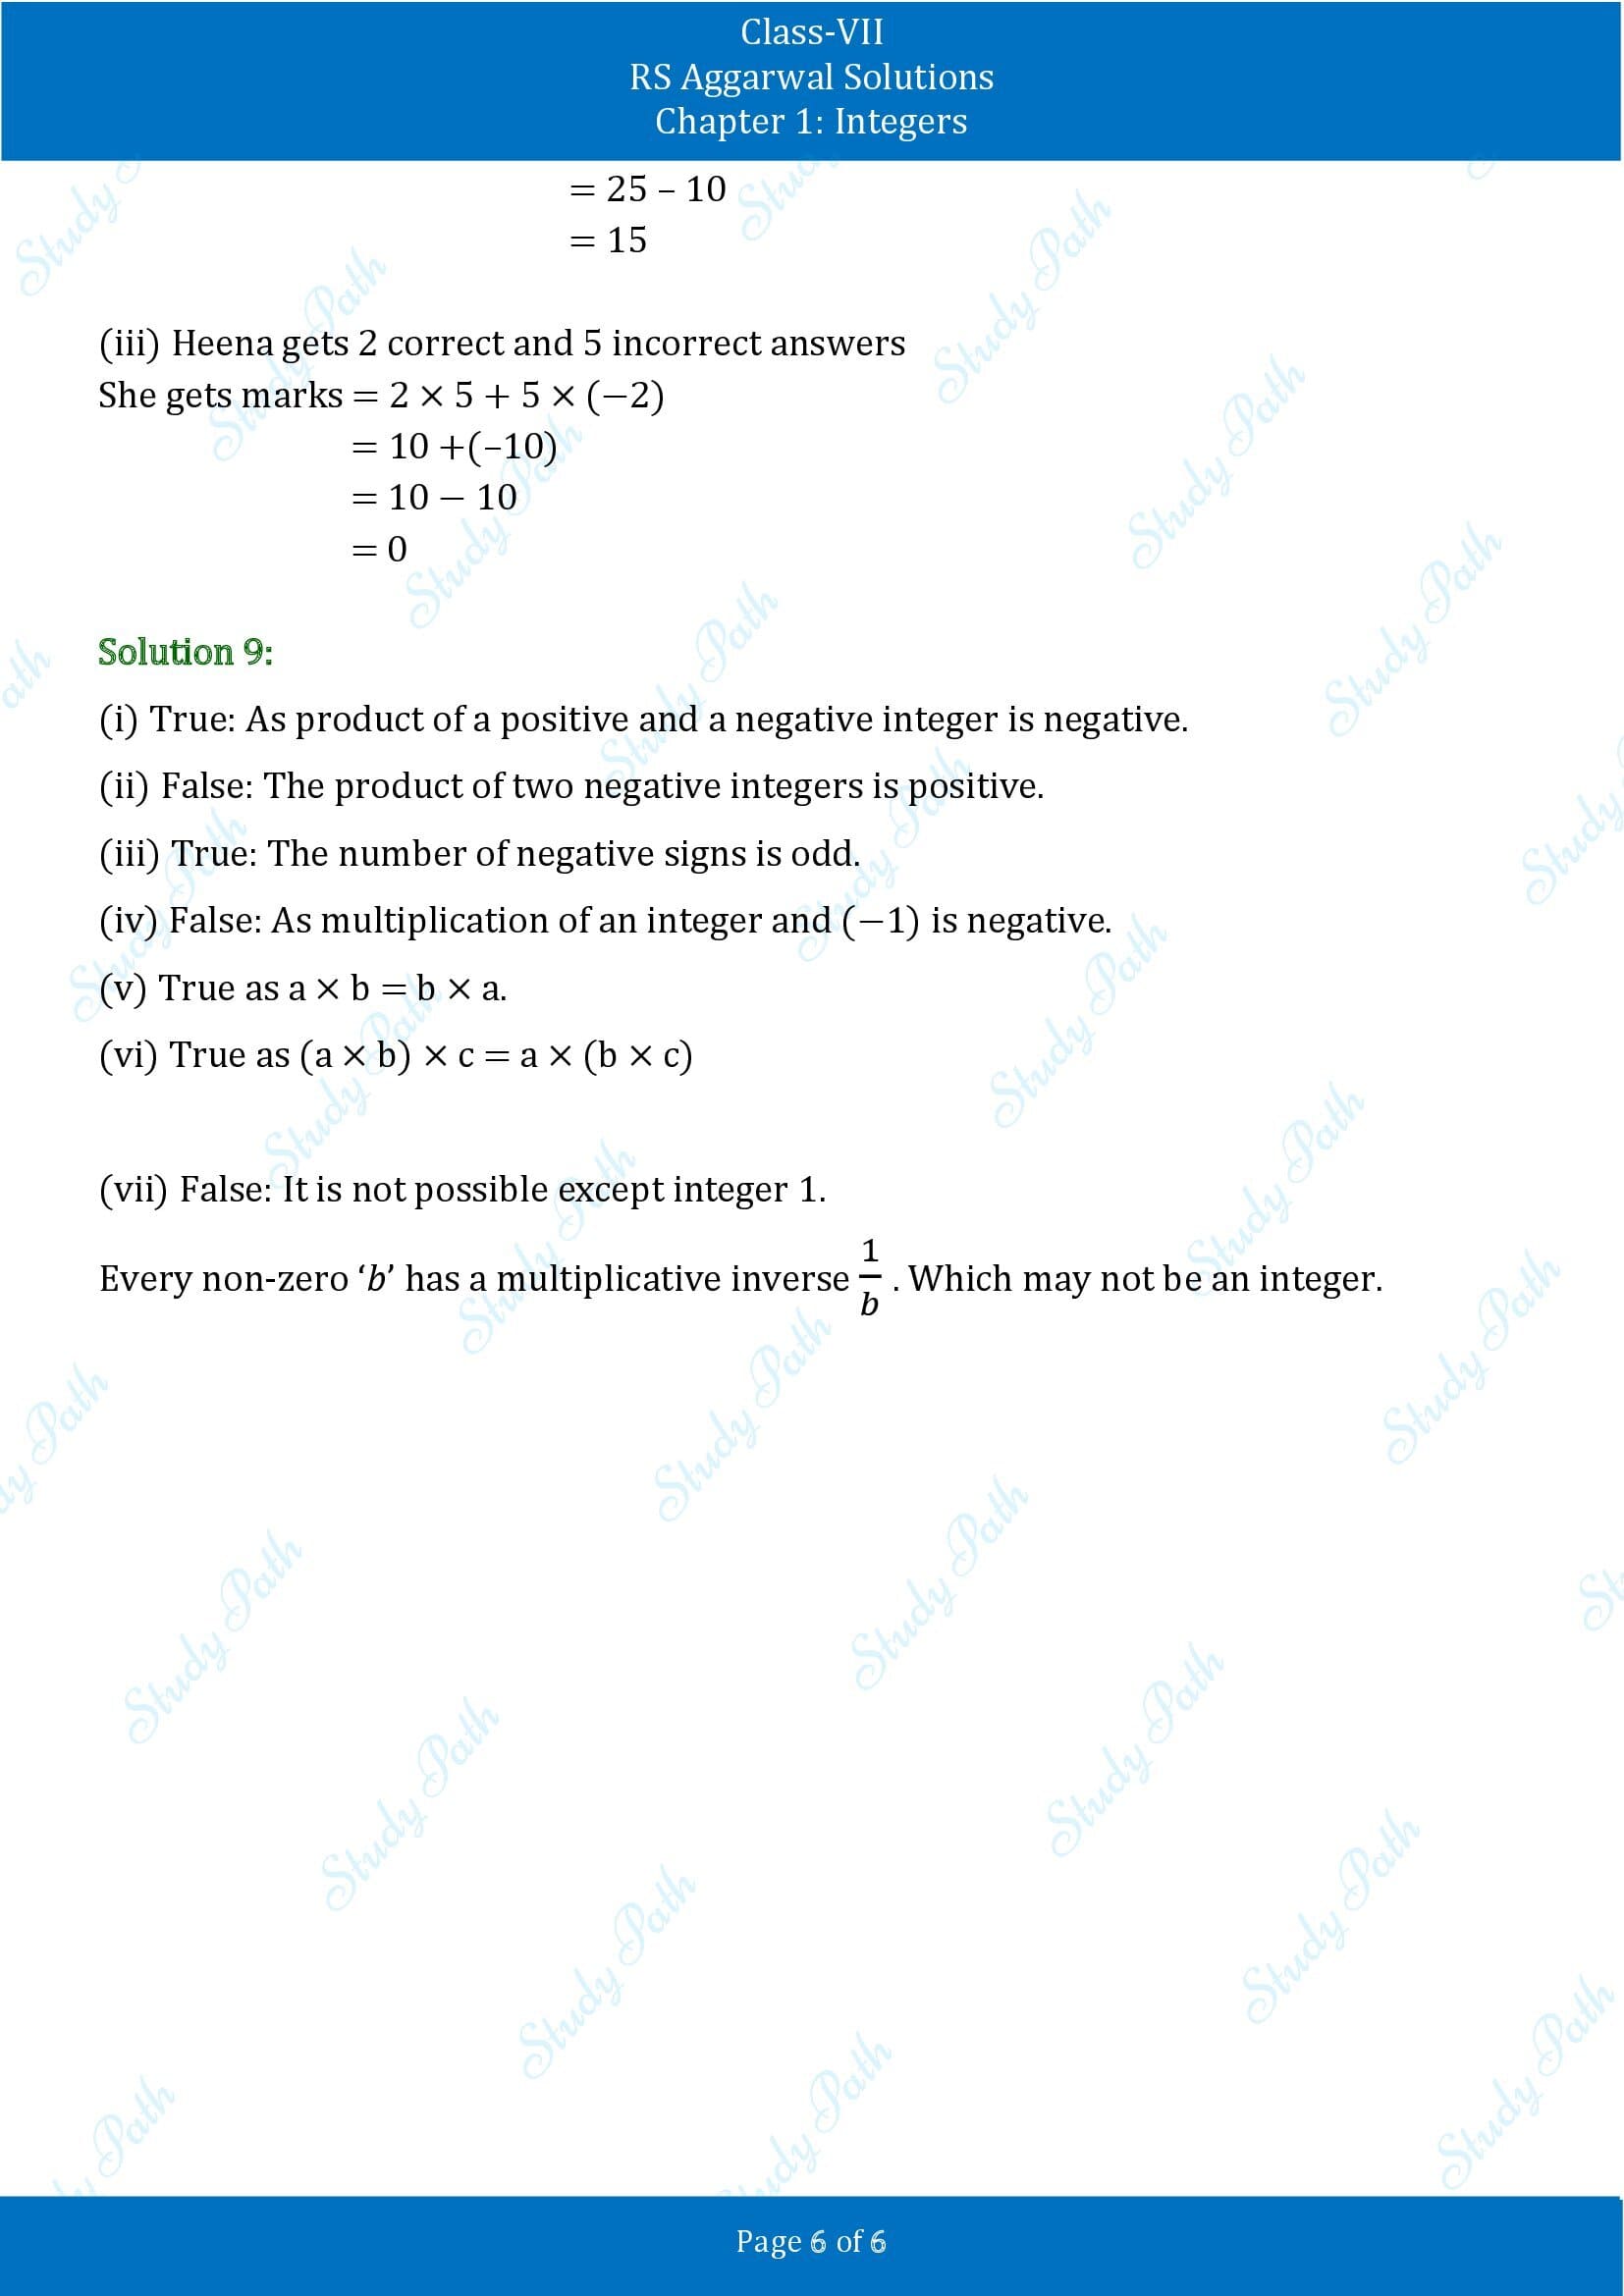 RS Aggarwal Solutions Class 7 Chapter 1 Integers Exercise 1B 00006